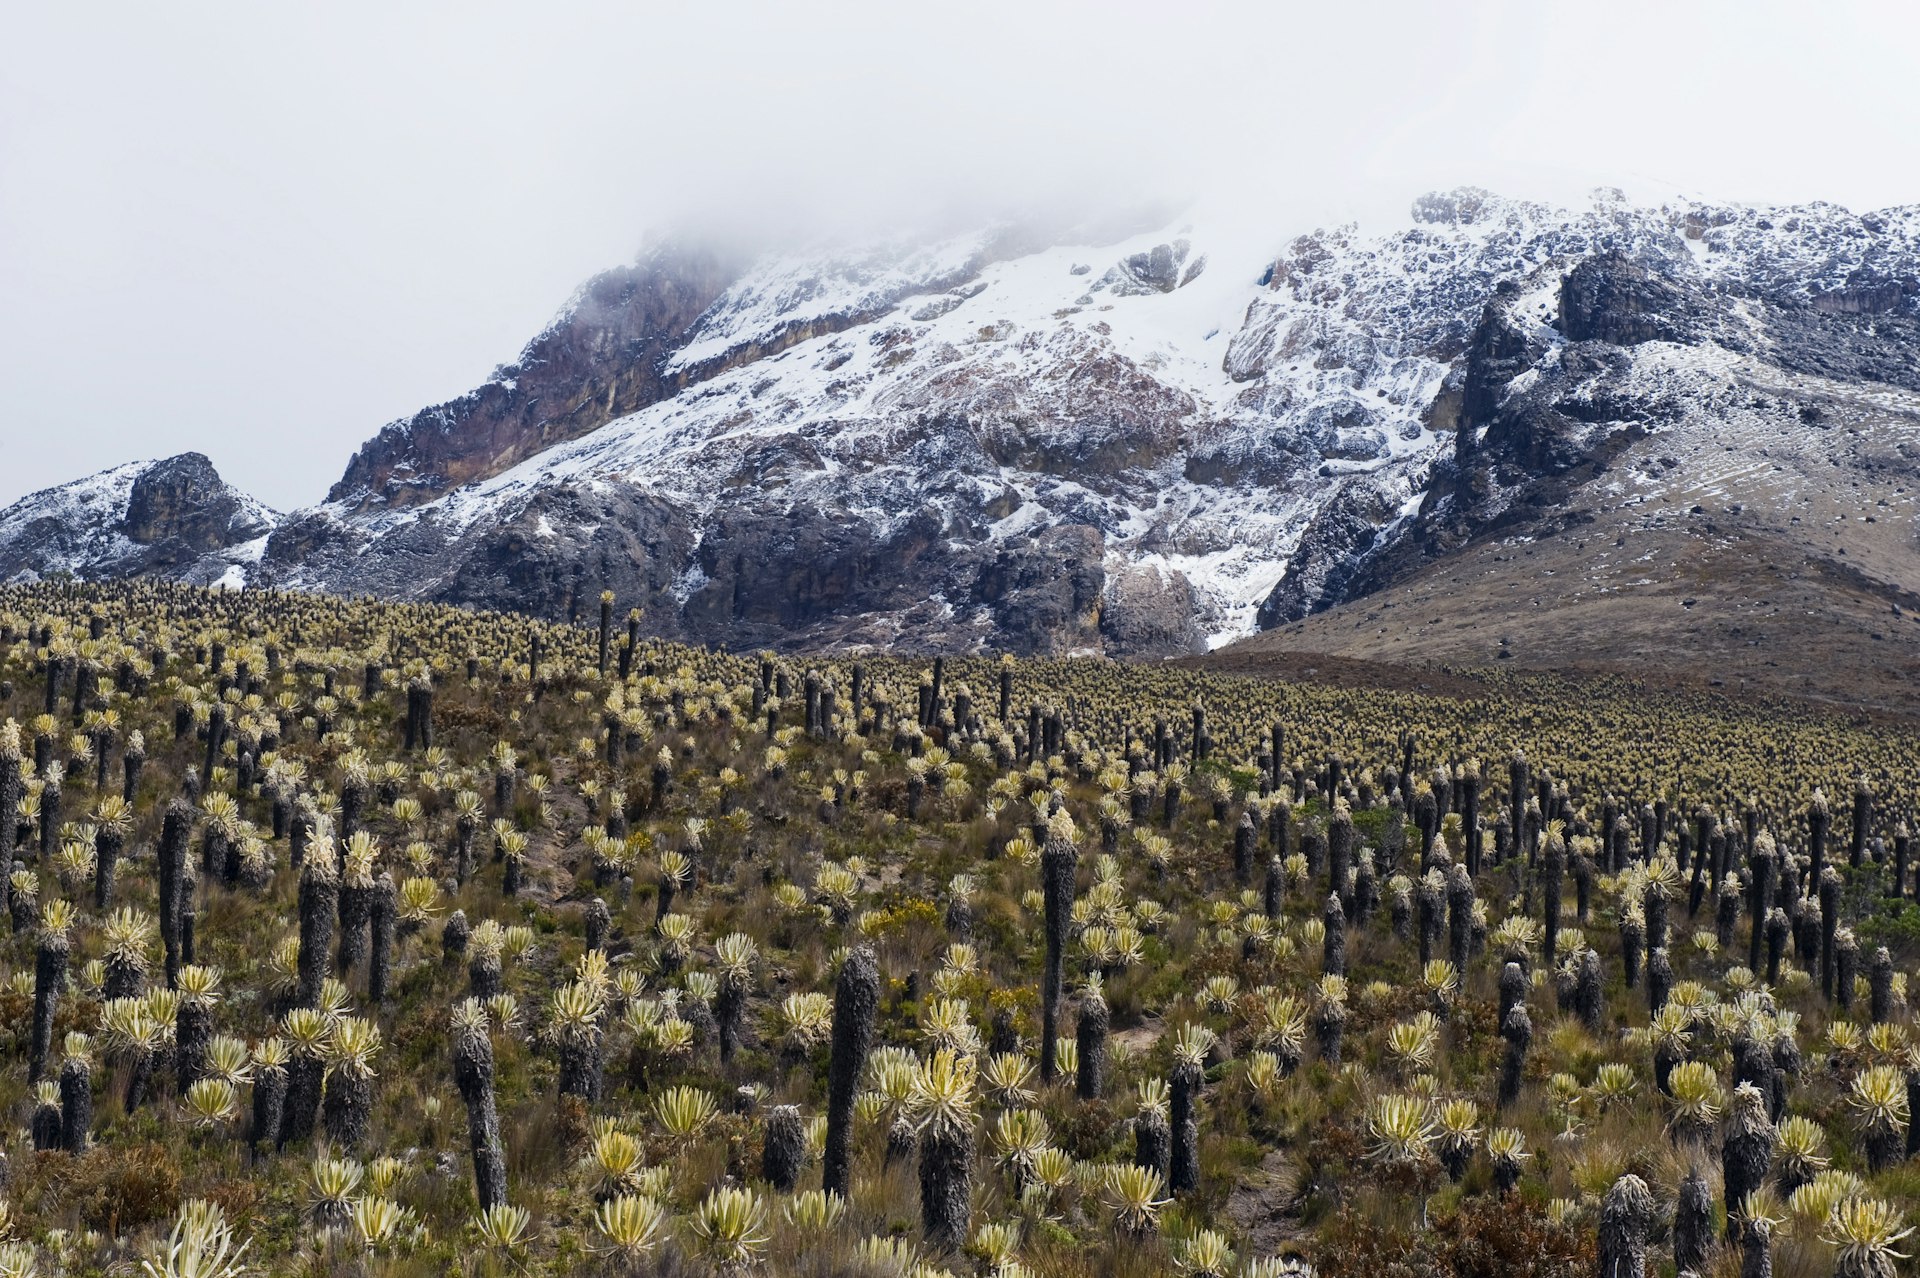 Frailejone plants grow out of the ground in front of a mountain peak covered with ice